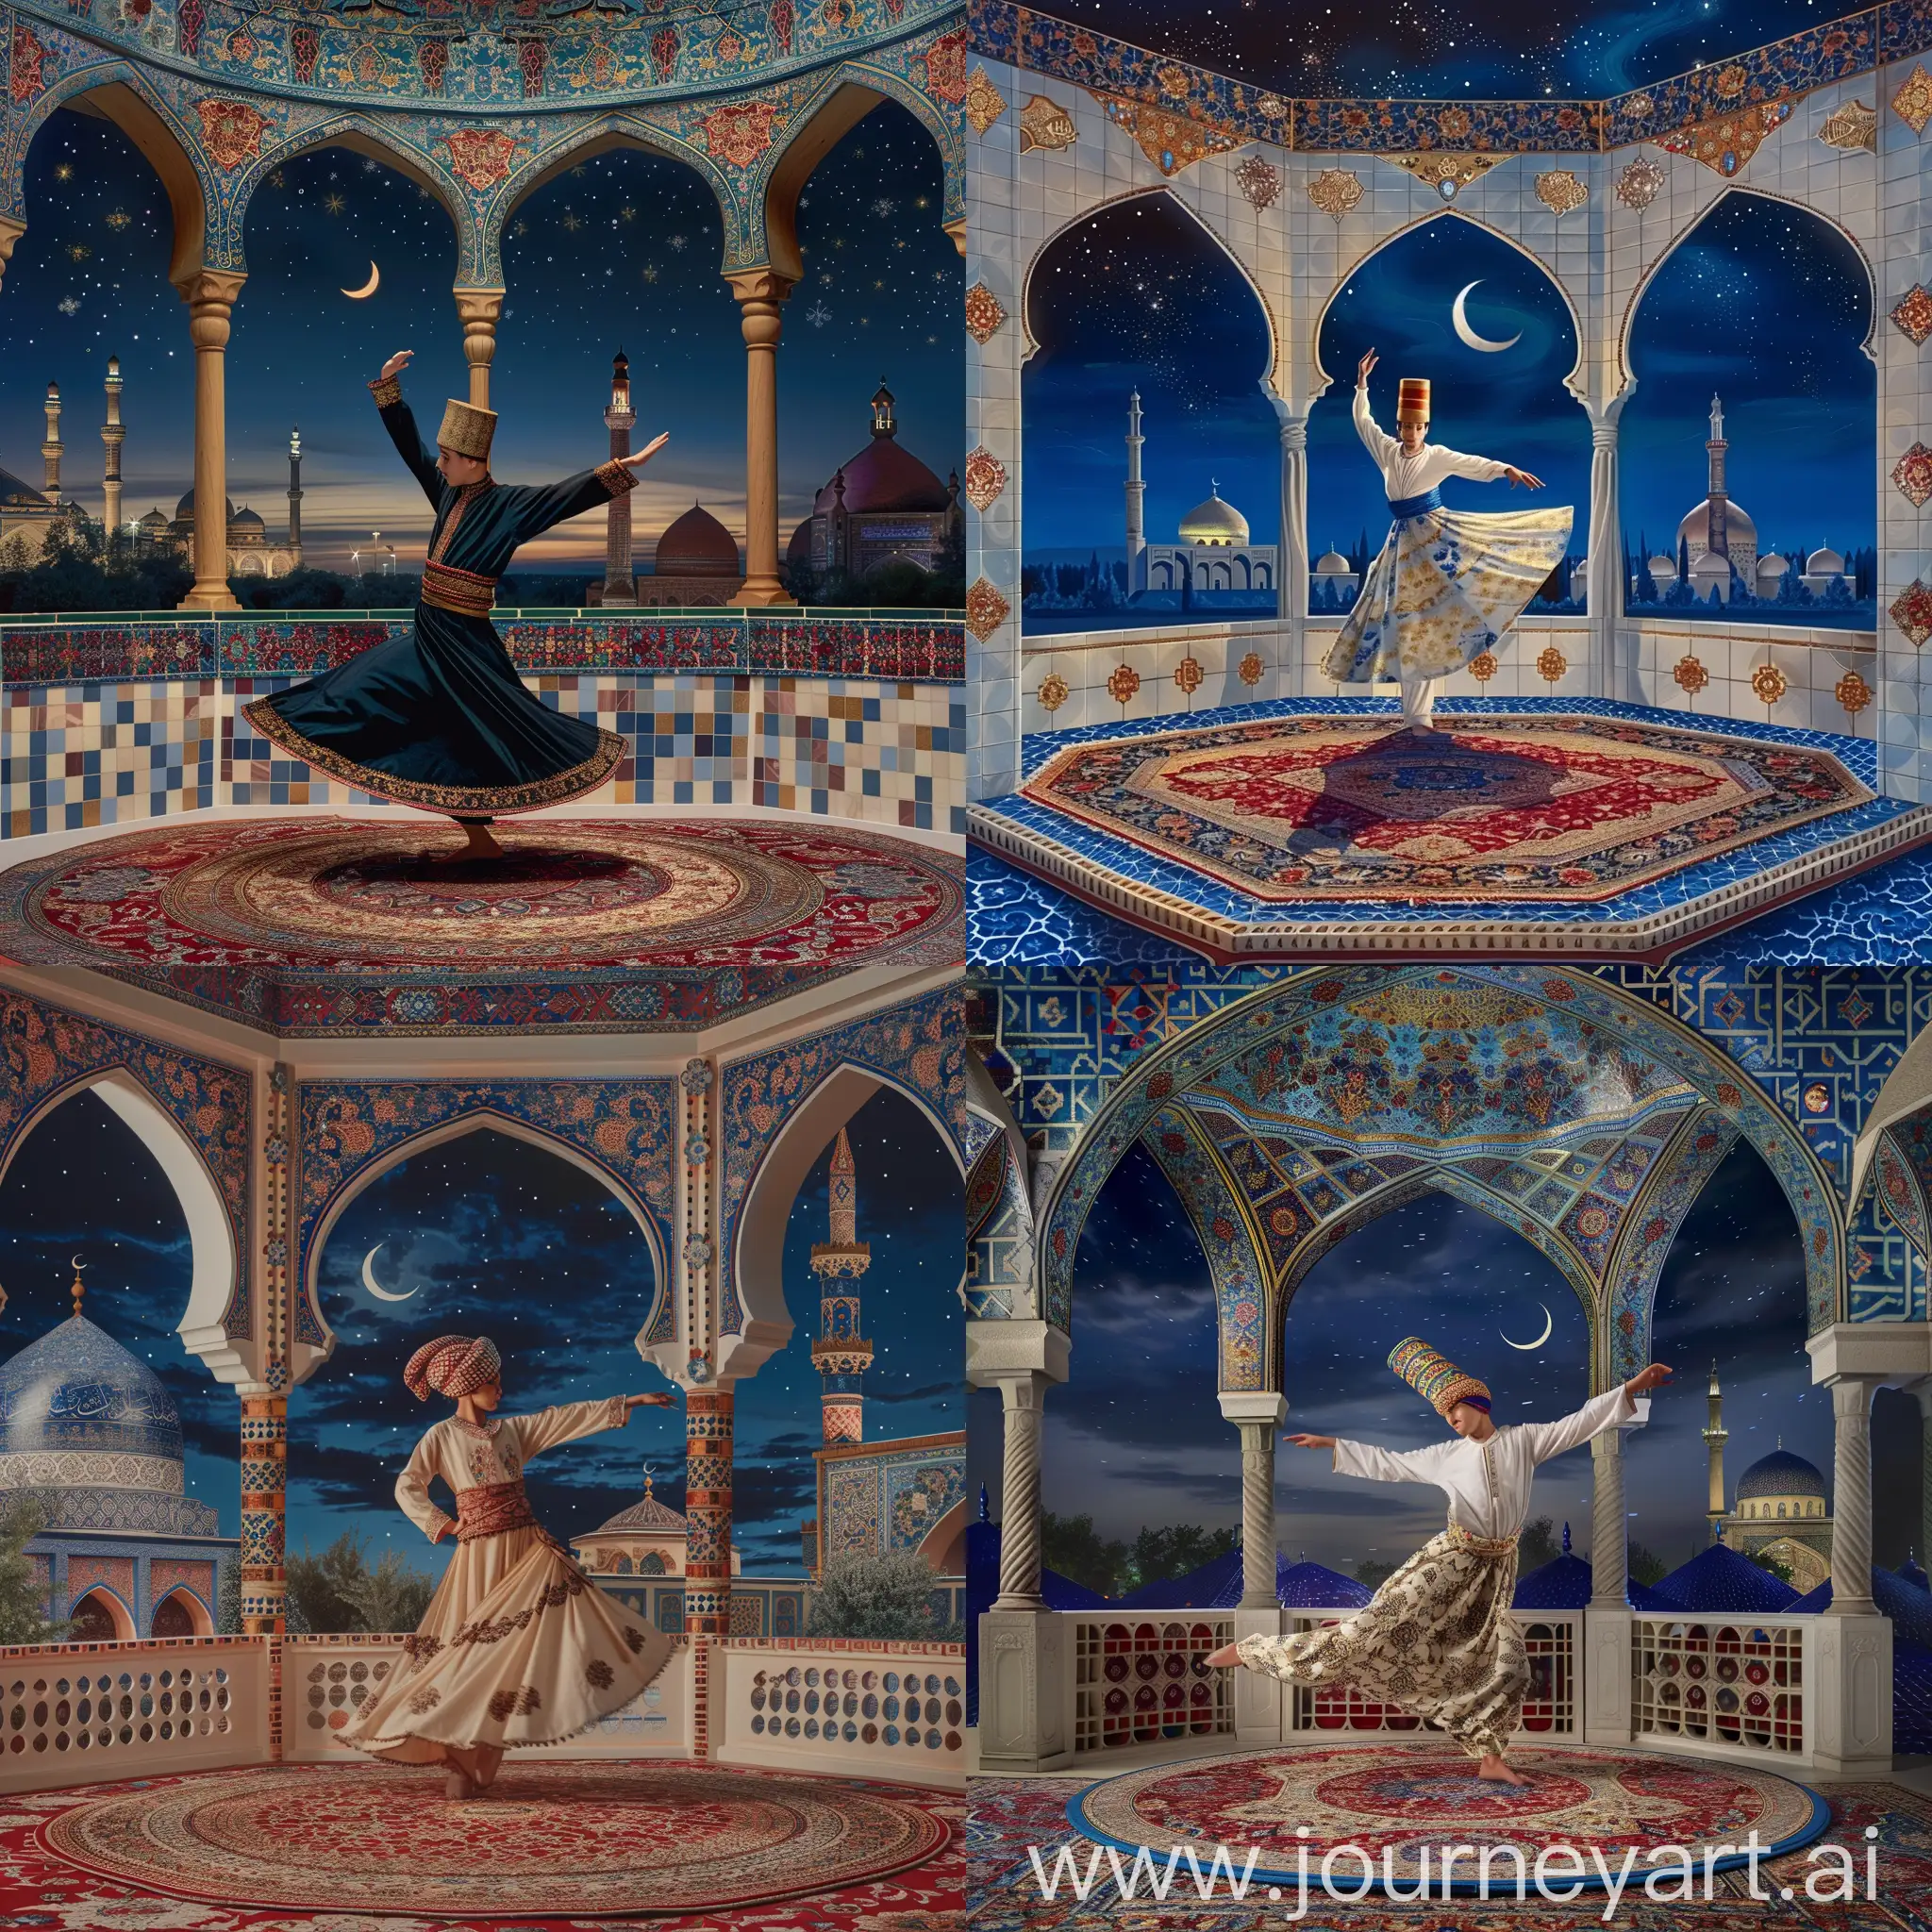 A young British dervish wearing cylindrical fez cap performing sufi whirling sema dance on a persian carpet, inside an octagonal balcony having three arches decorated with red blue gold persian floral motifs, serene night sky with a crescent, view of Persian tiled mosque, White blue red golden composition  --sref https://shorturl.at/8HVyW --sw 999 --style raw --q 1 --s 999 --ar 2:3 